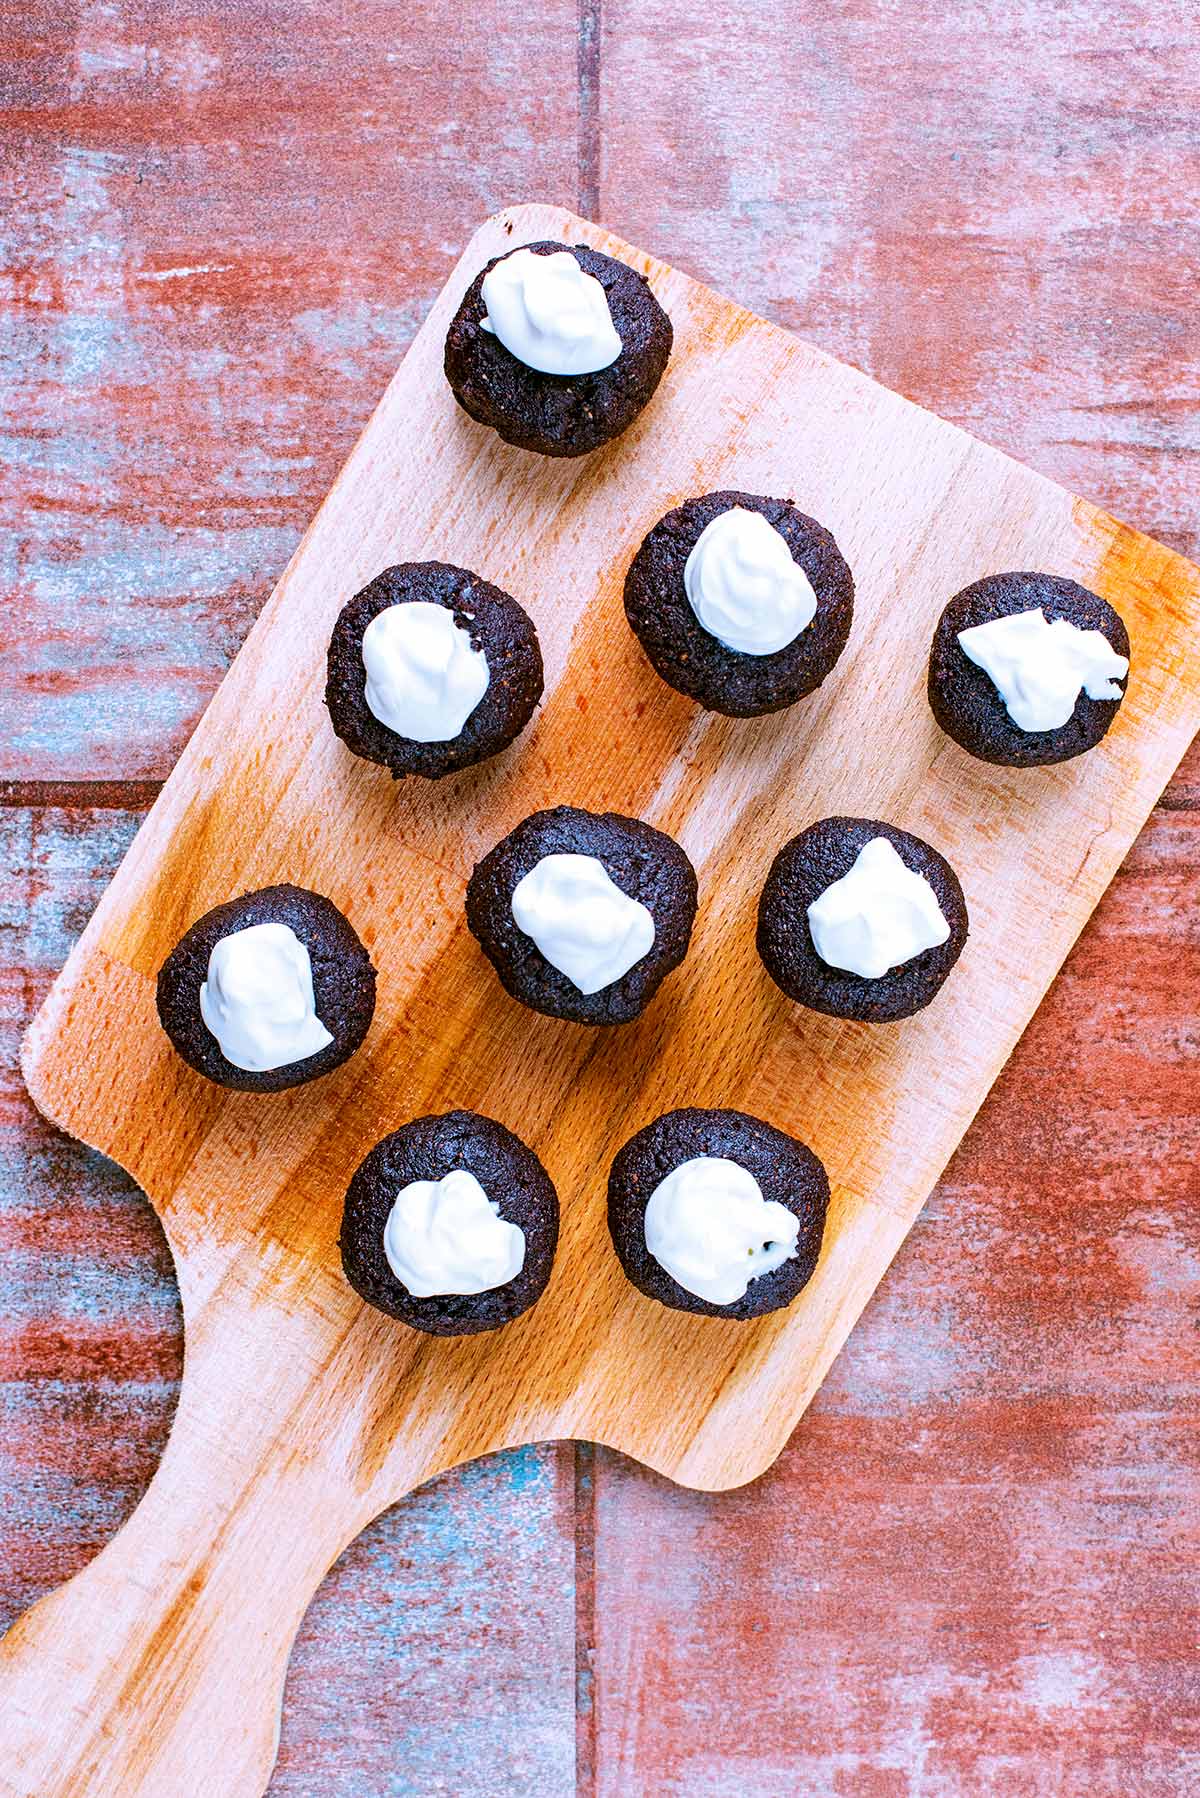 Nine raw brownie balls, all topped with yogurt, on a wooden board.